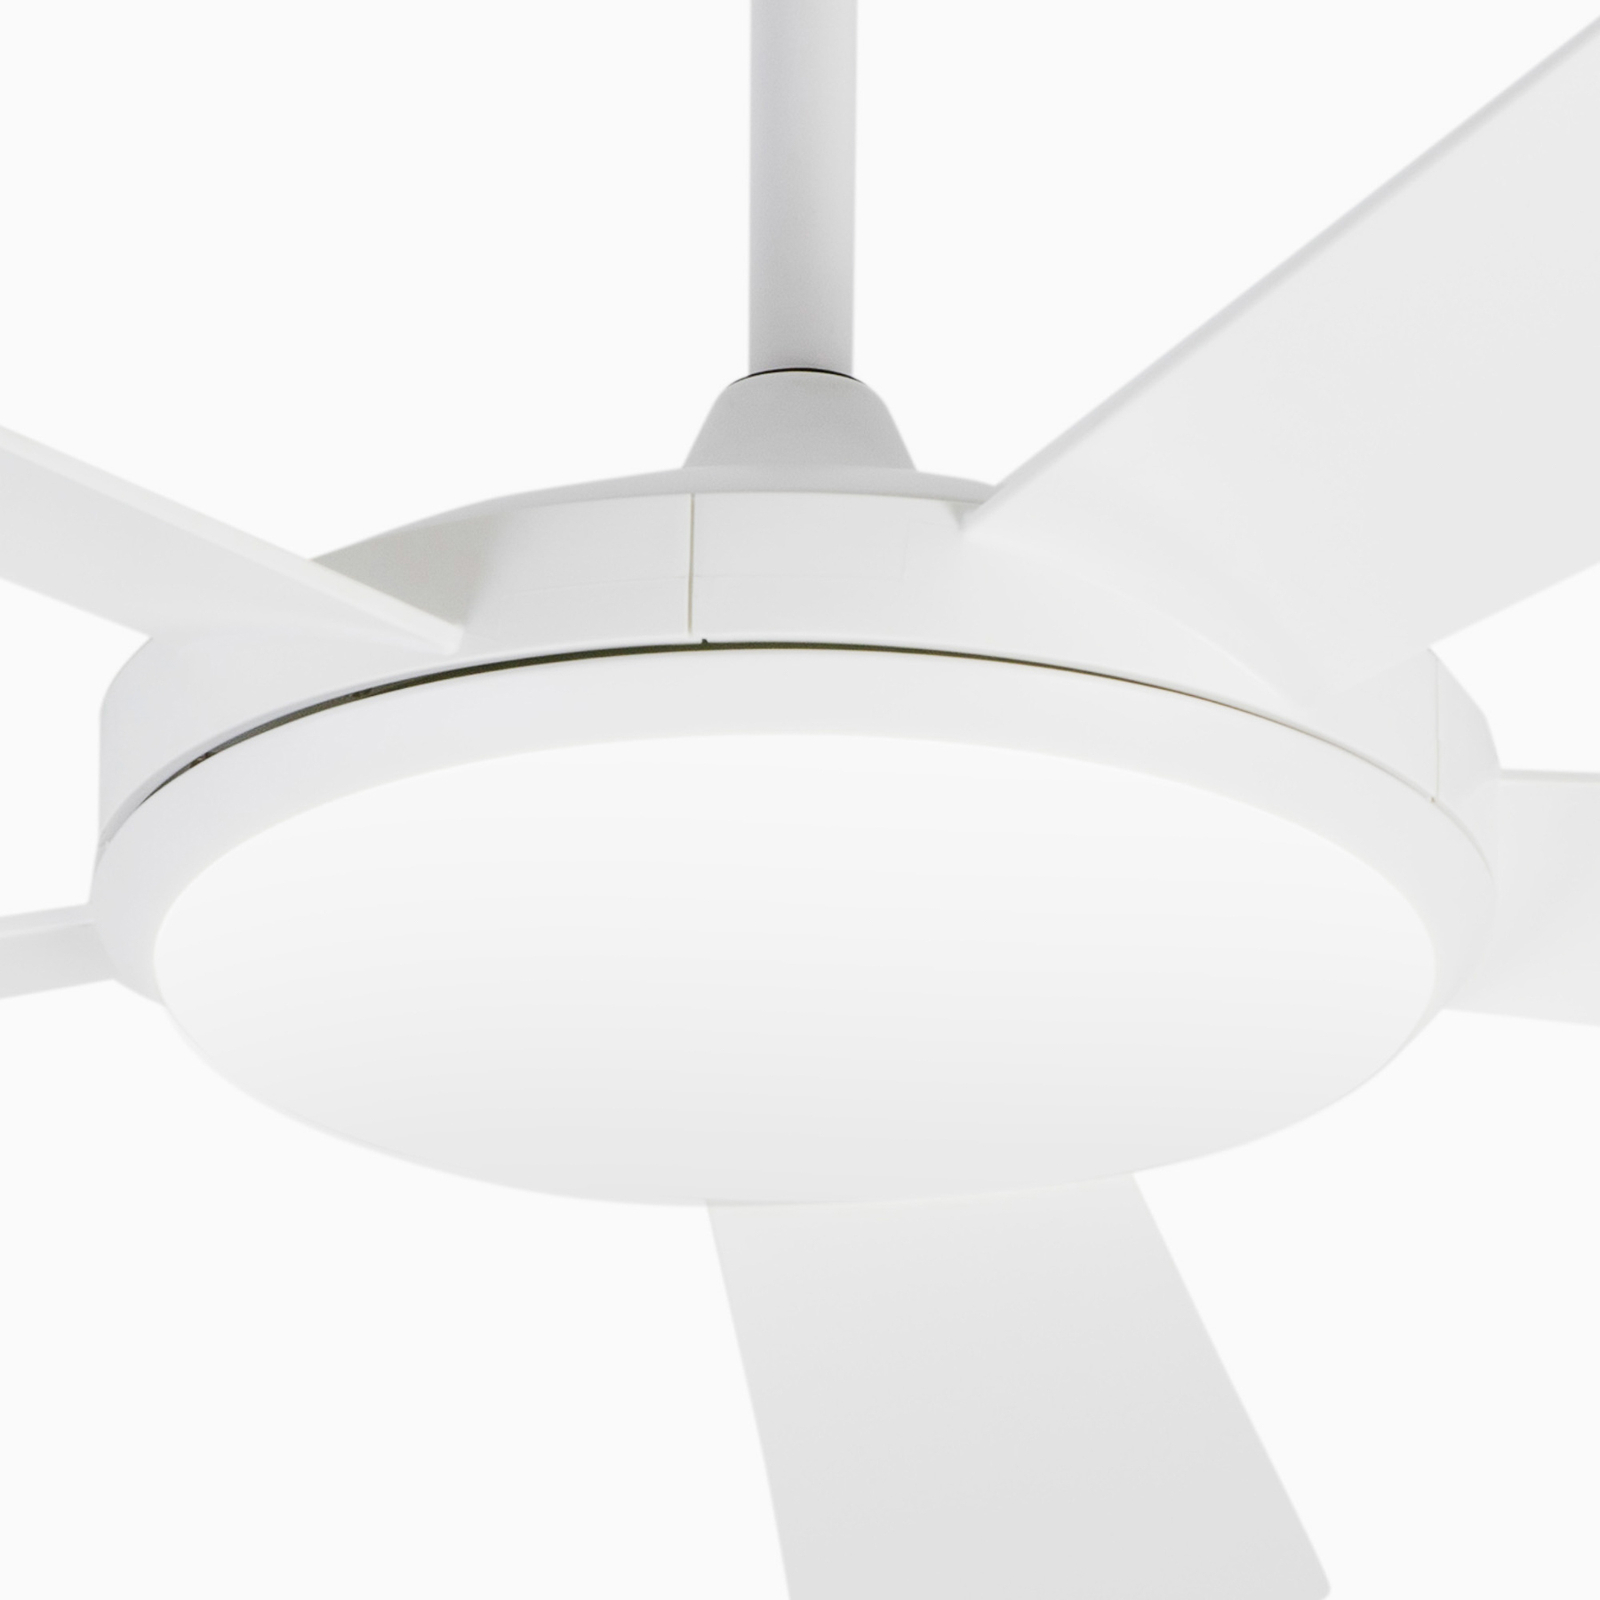 Saona L ceiling fan with an LED light, CCT DC